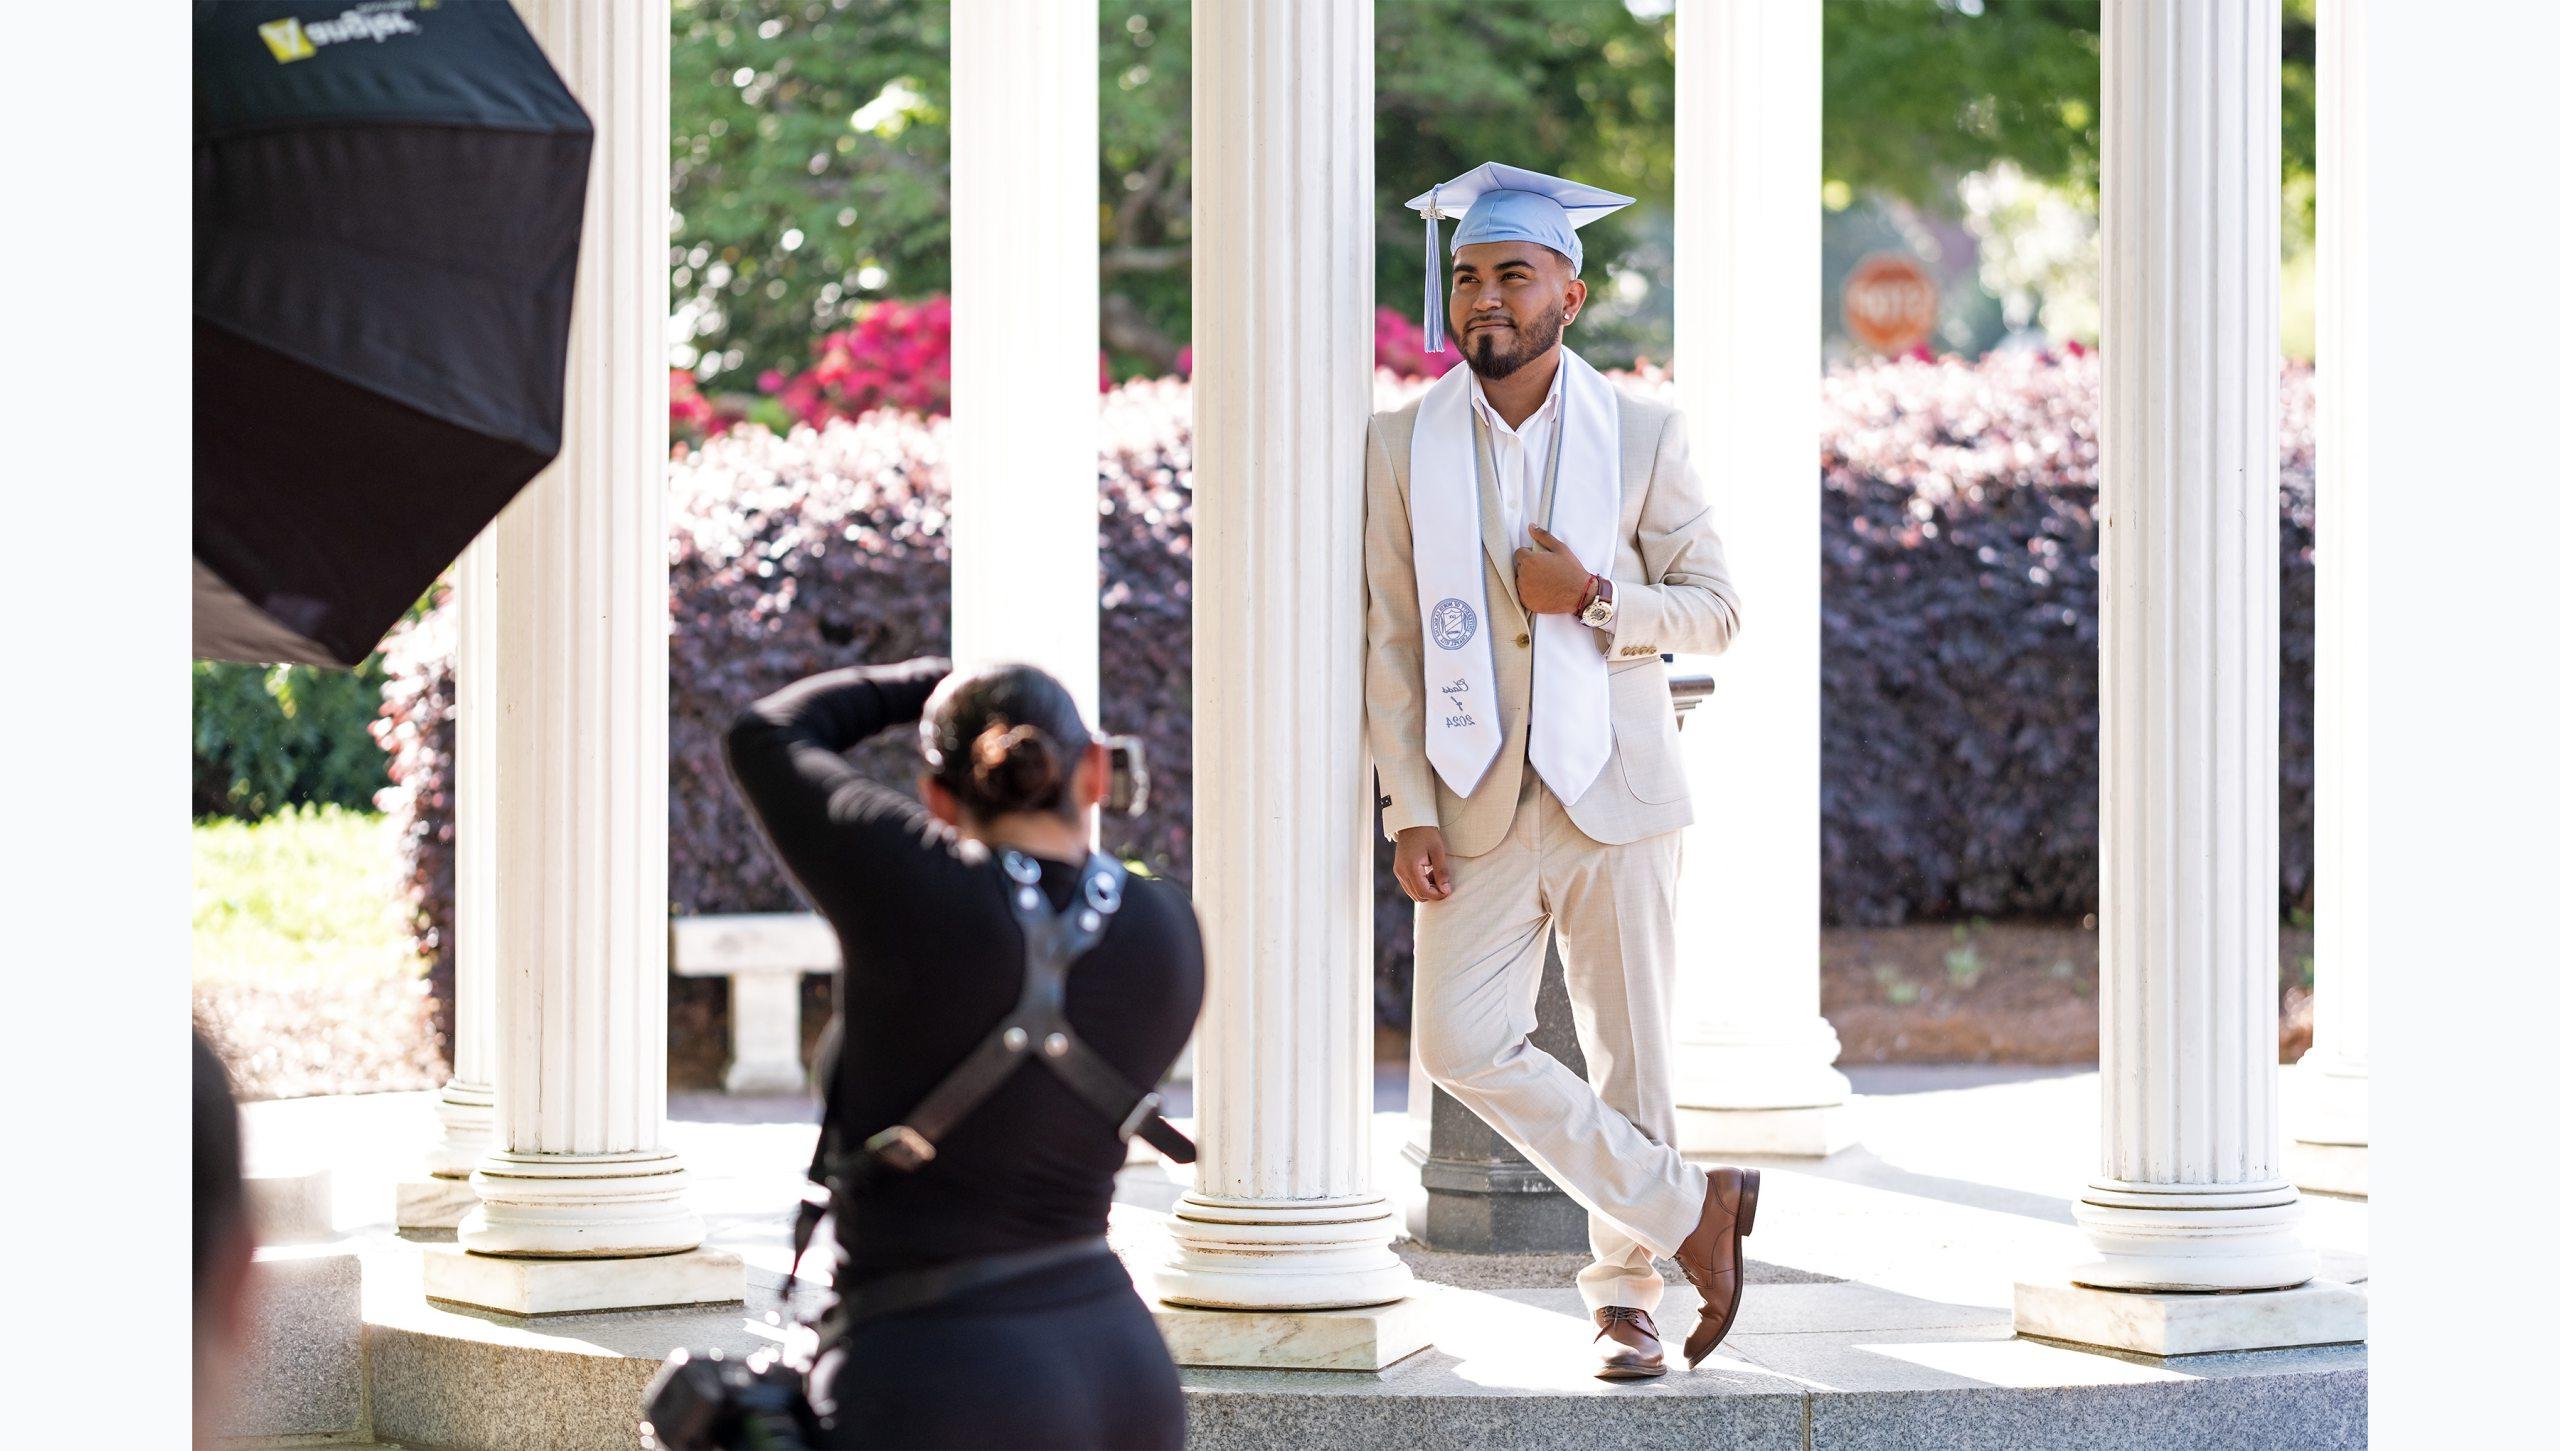 A student posing for a graduation photo at the Old Well in a suit with his graduation cap.